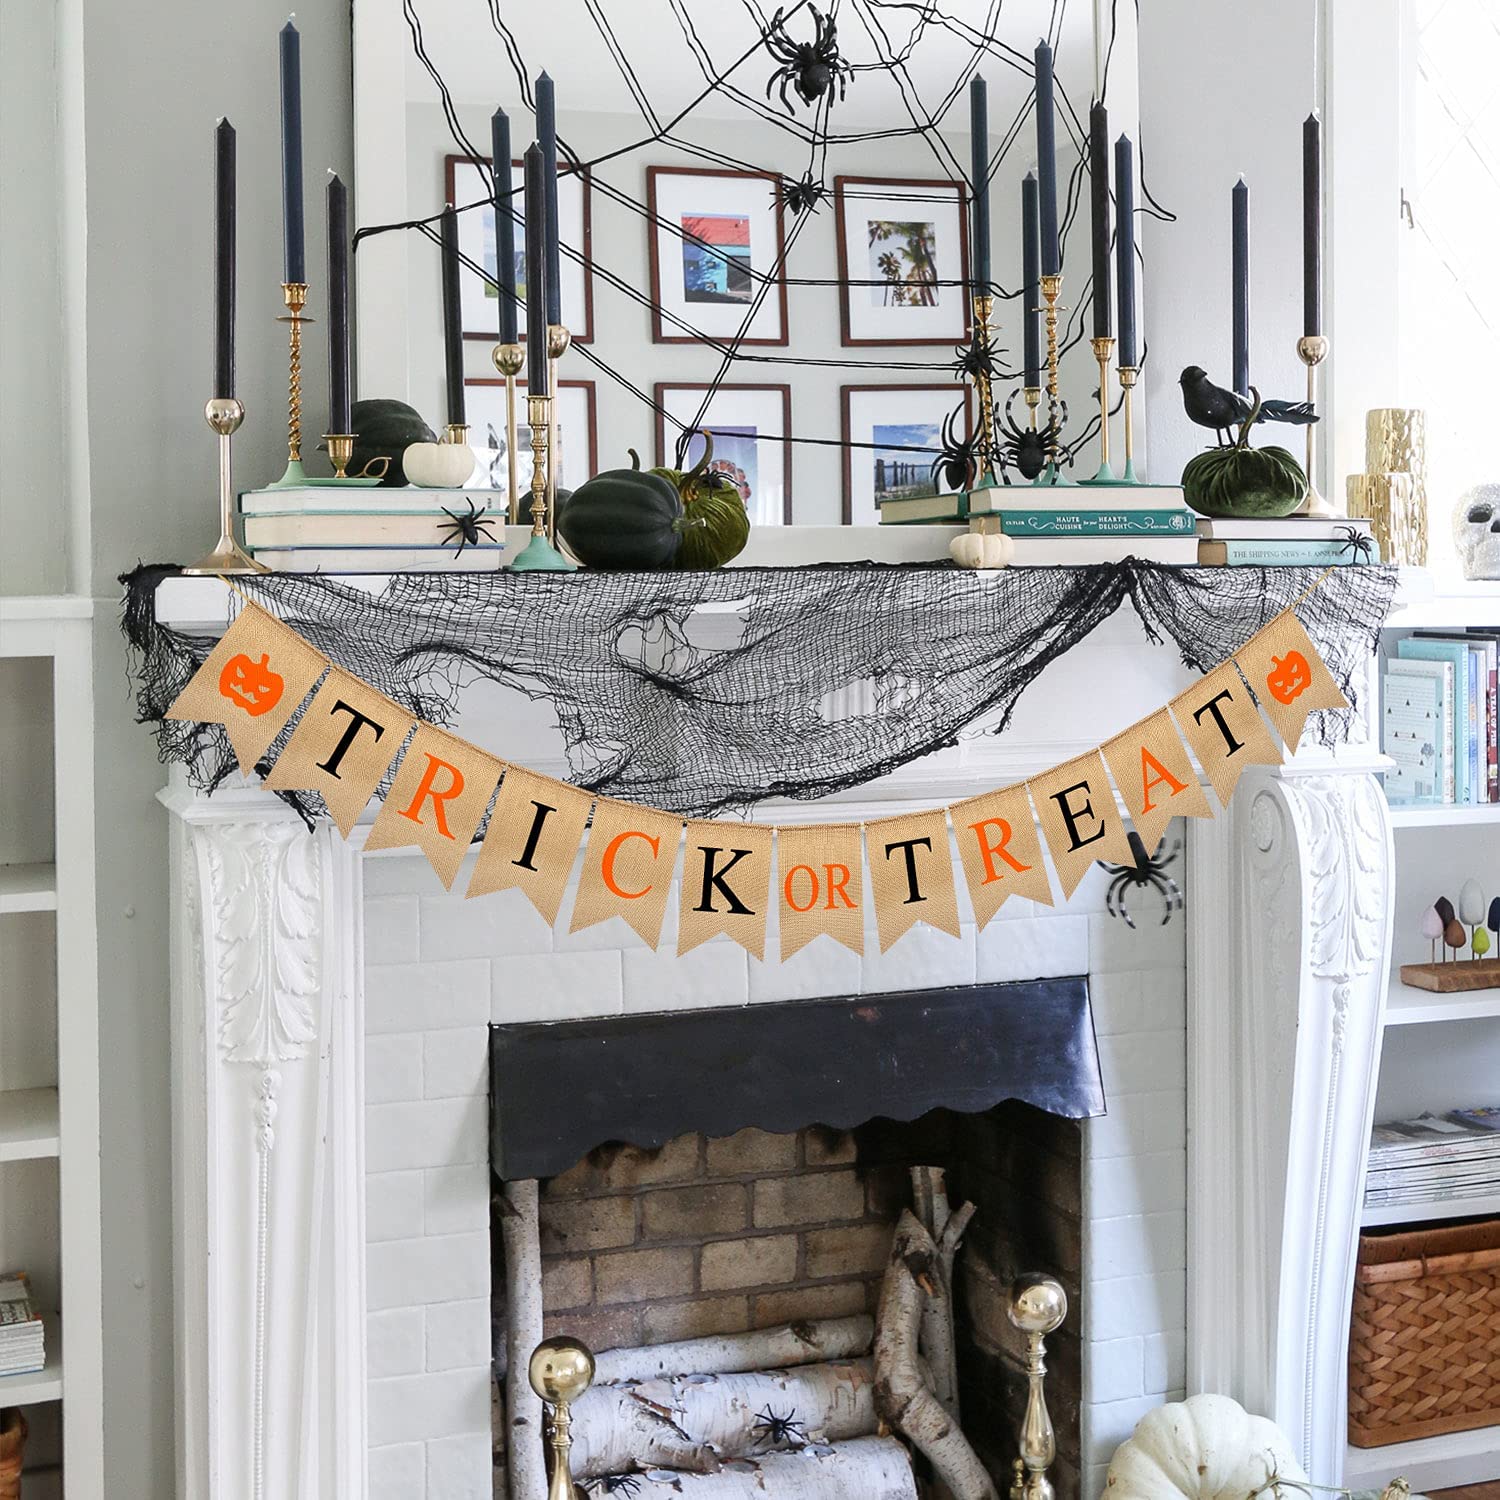 Trick or Treat Halloween Banner, 9.2ft/2.8m Burlap Halloween Bunting Garland with Pumpkin Pattern, Cute and Colorful Halloween Decorations Banner for Fireplace Wall Porch and Party